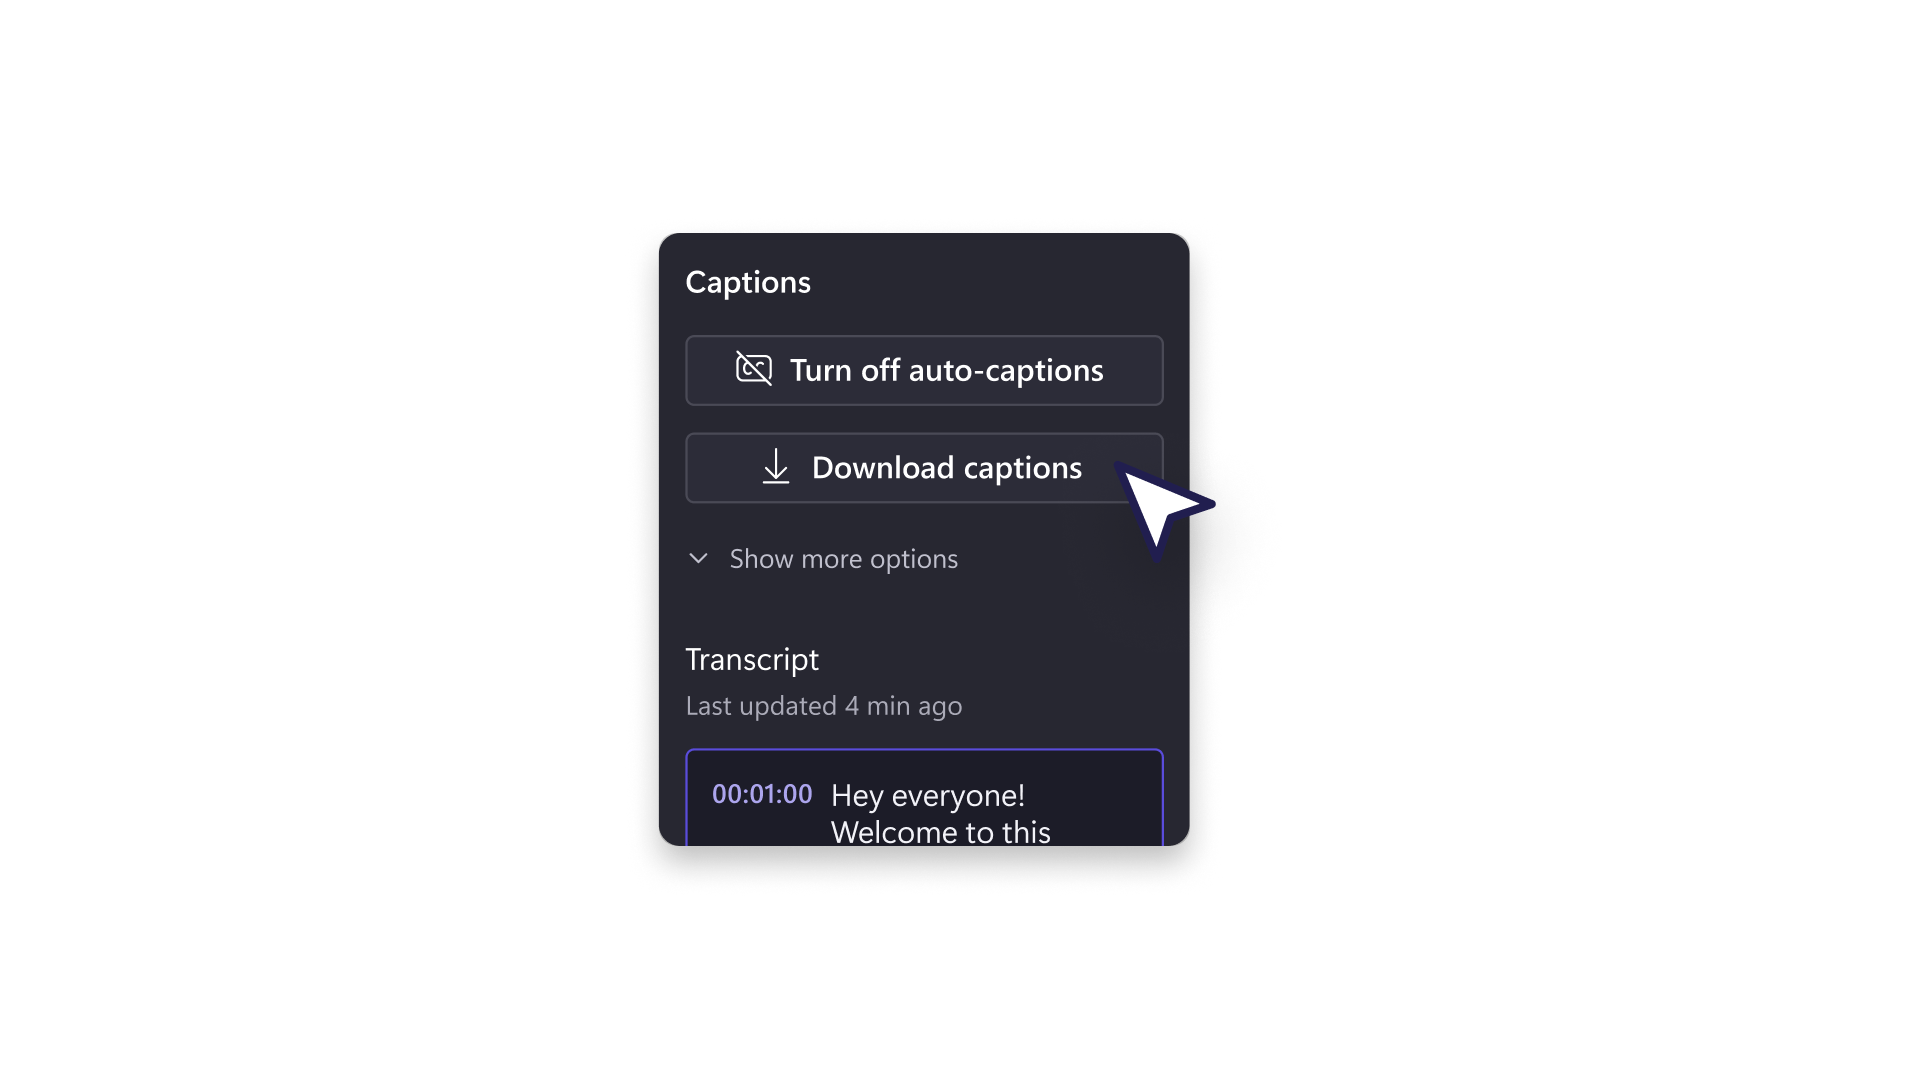 An image of button to download captions from auto-captions feature in Clipchamp